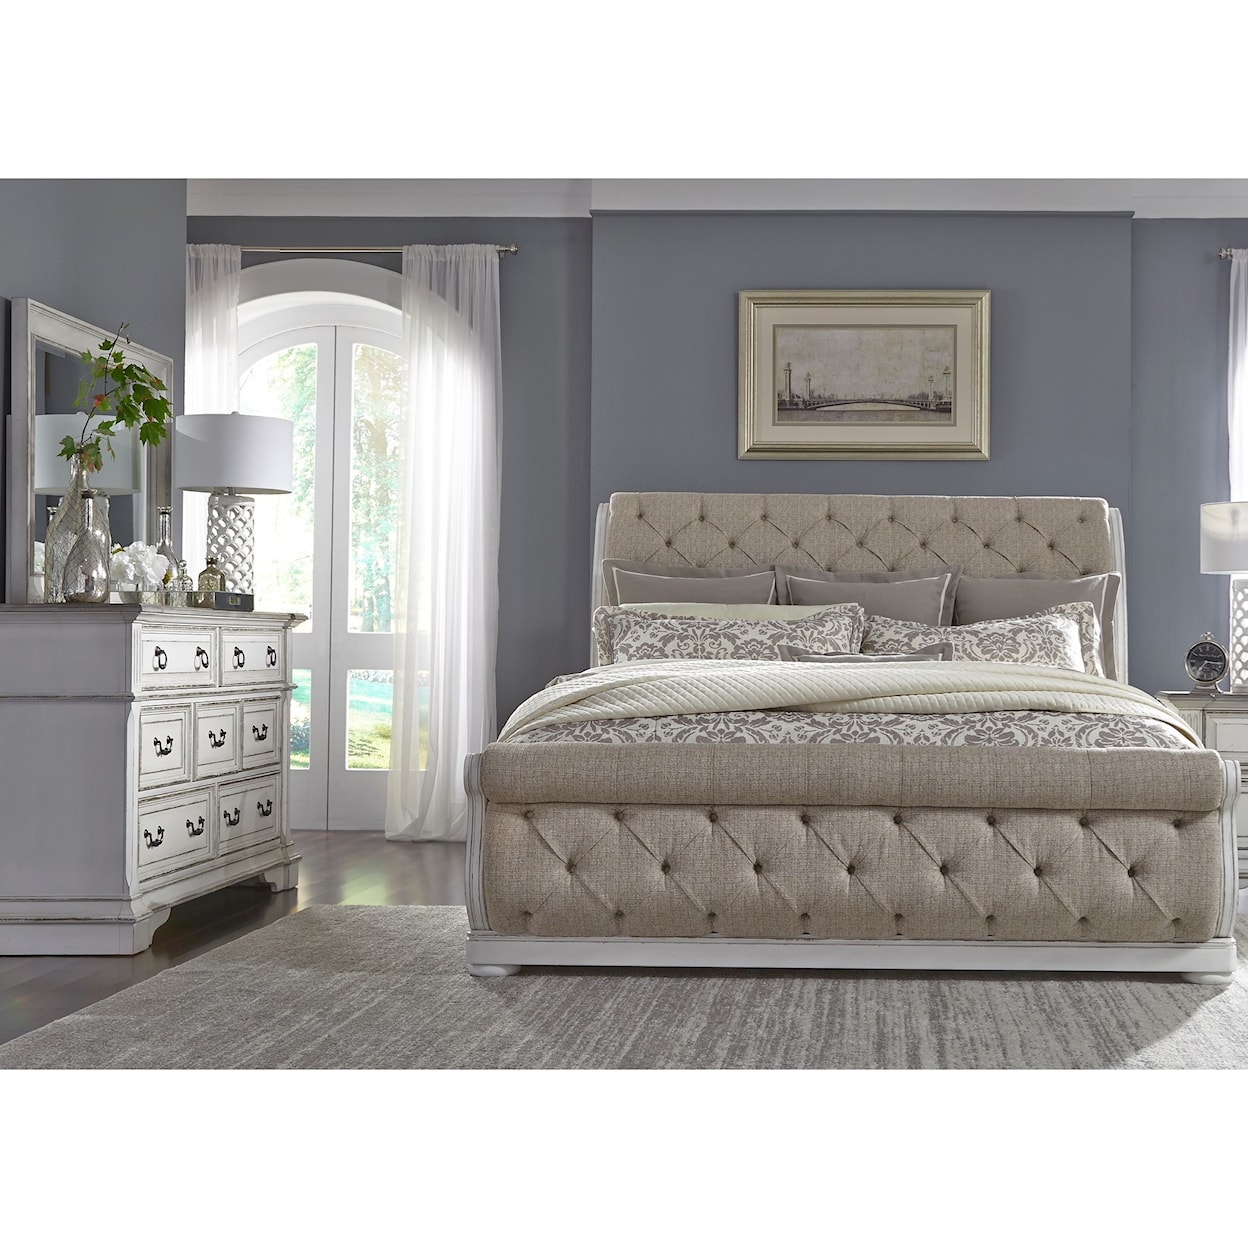 Liberty Furniture Abbey Park King Bedroom Group